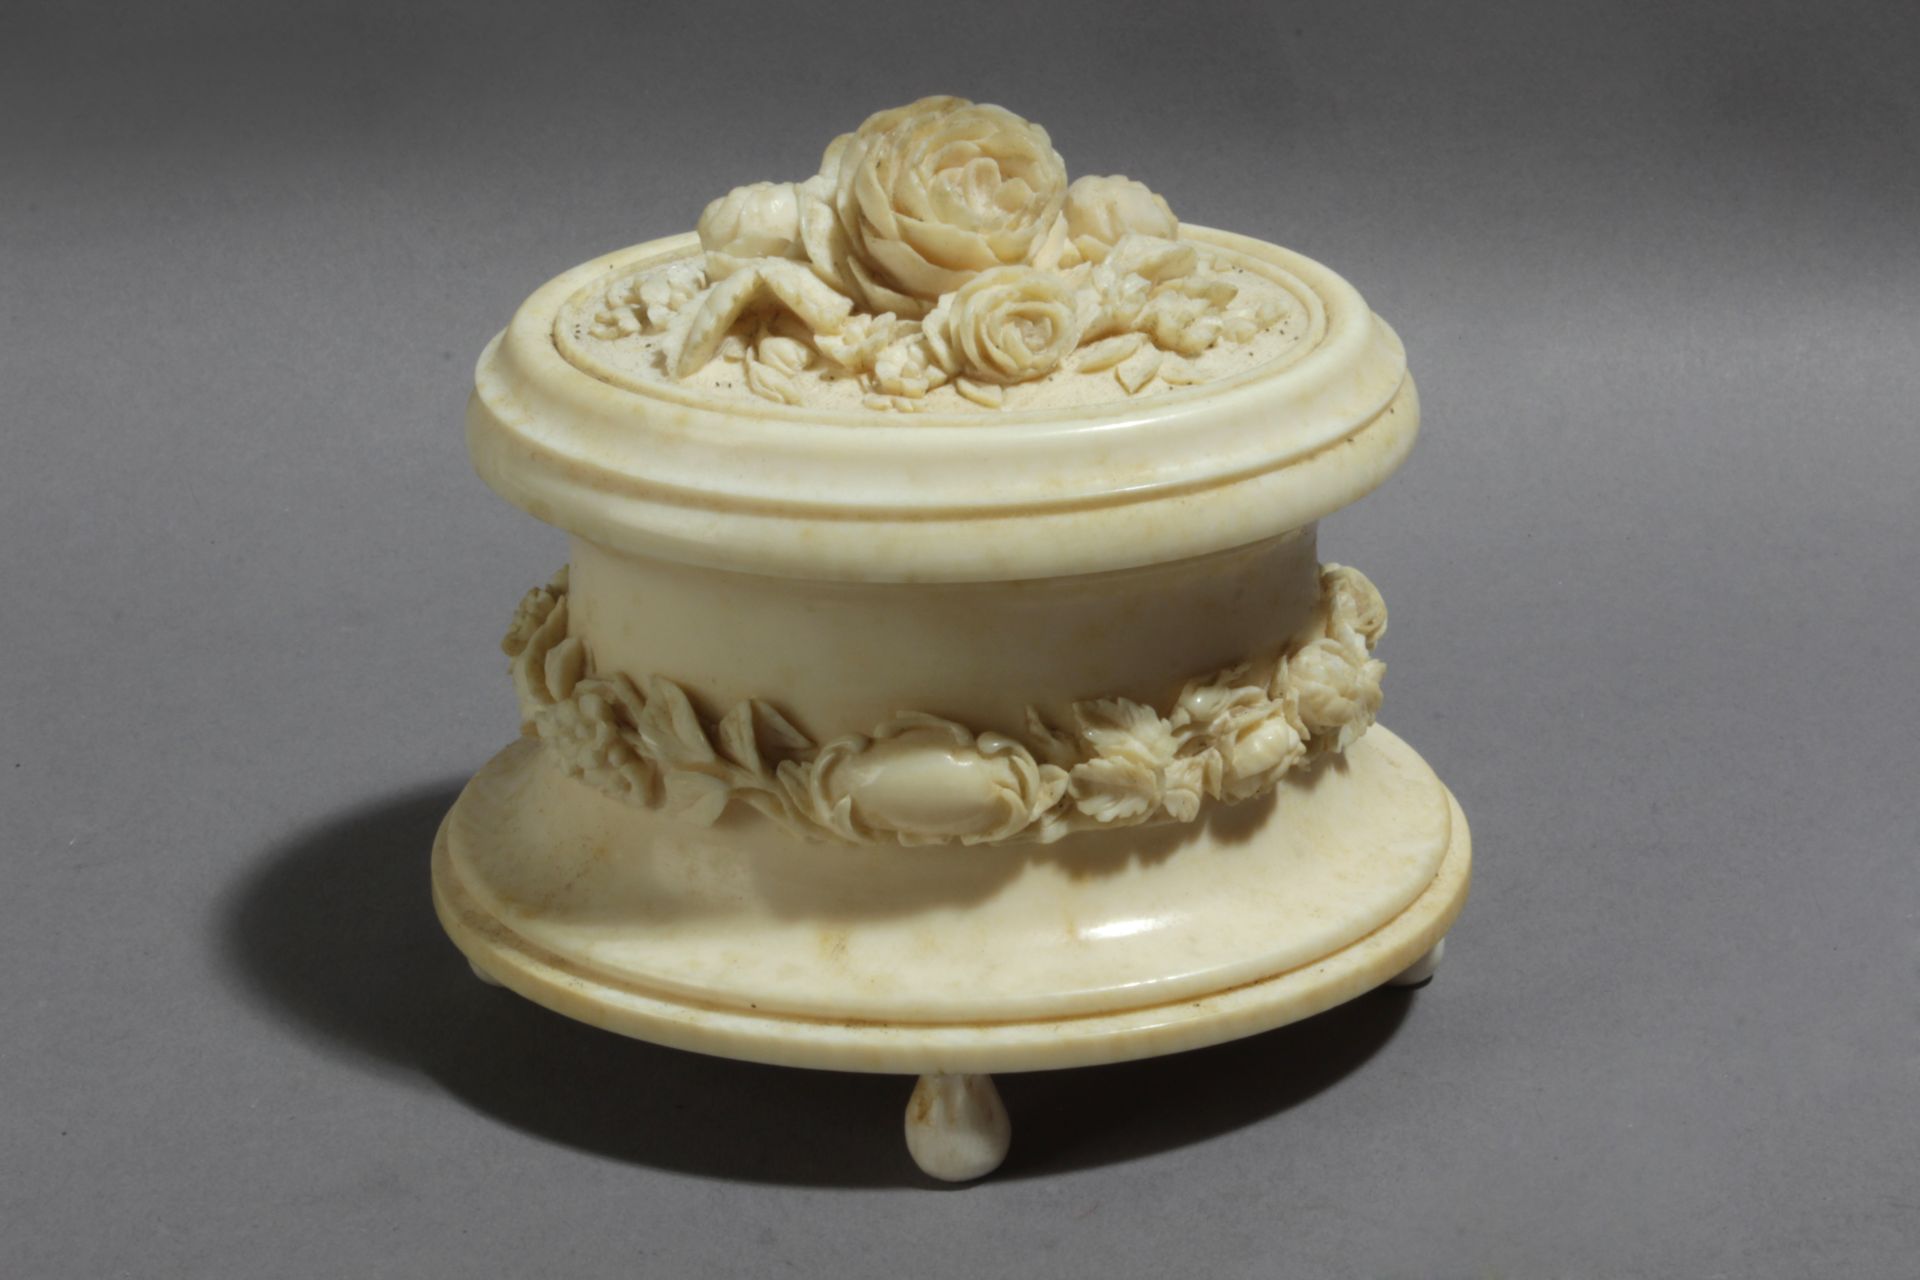 A 19th century carved ivory jewellery box from Dieppe